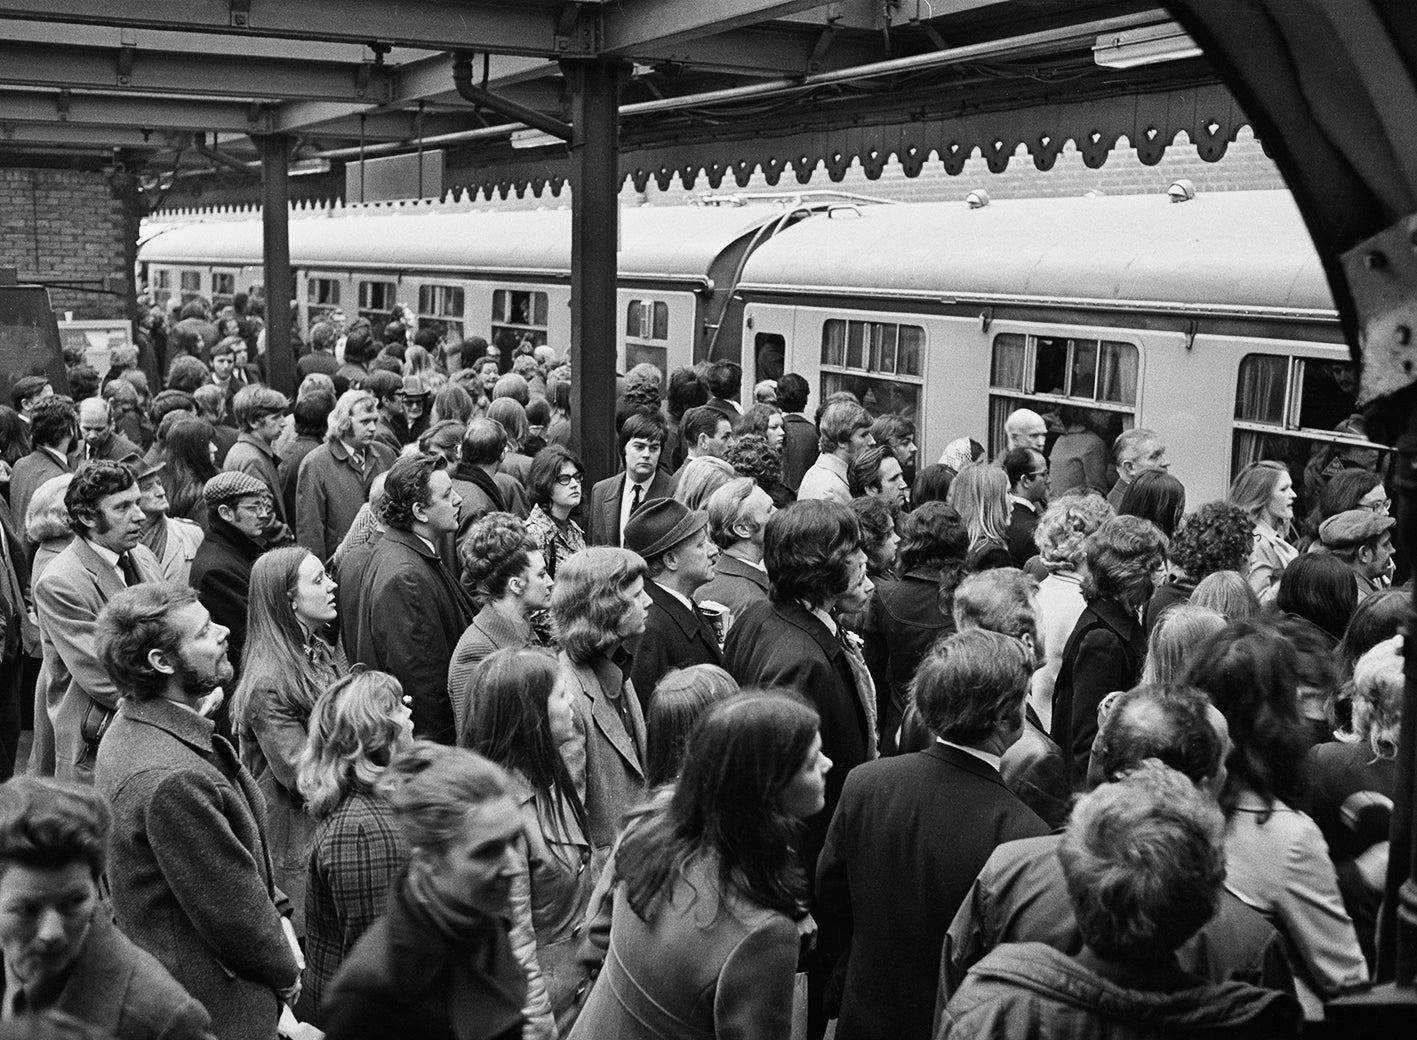 From the NS archive: The 1972 rail pay dispute